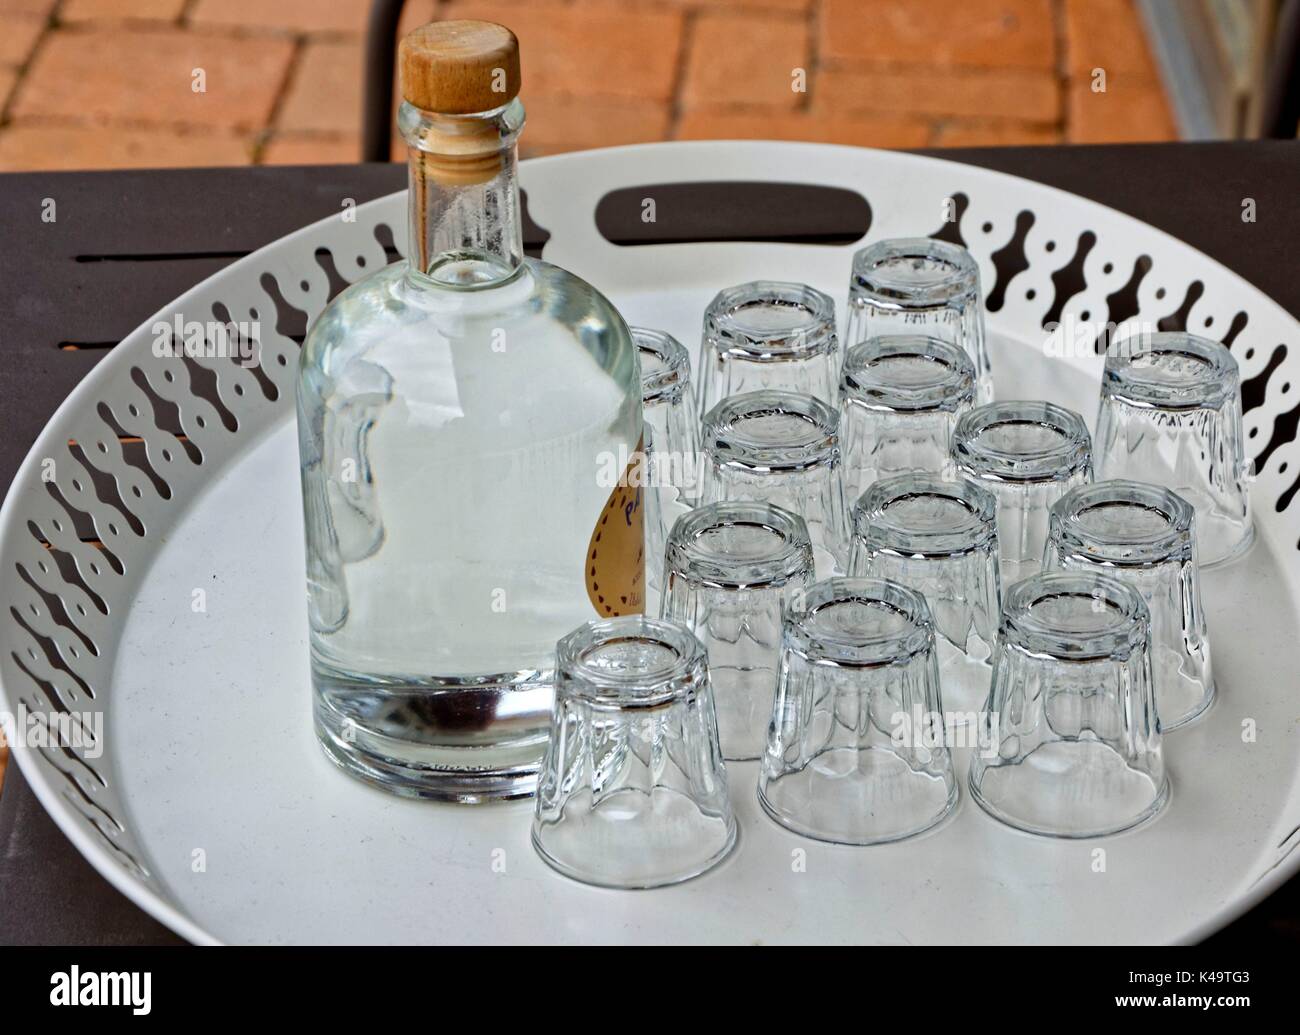 Weisses Round Tray With Liquor Bottle And Glasses Stock Photo